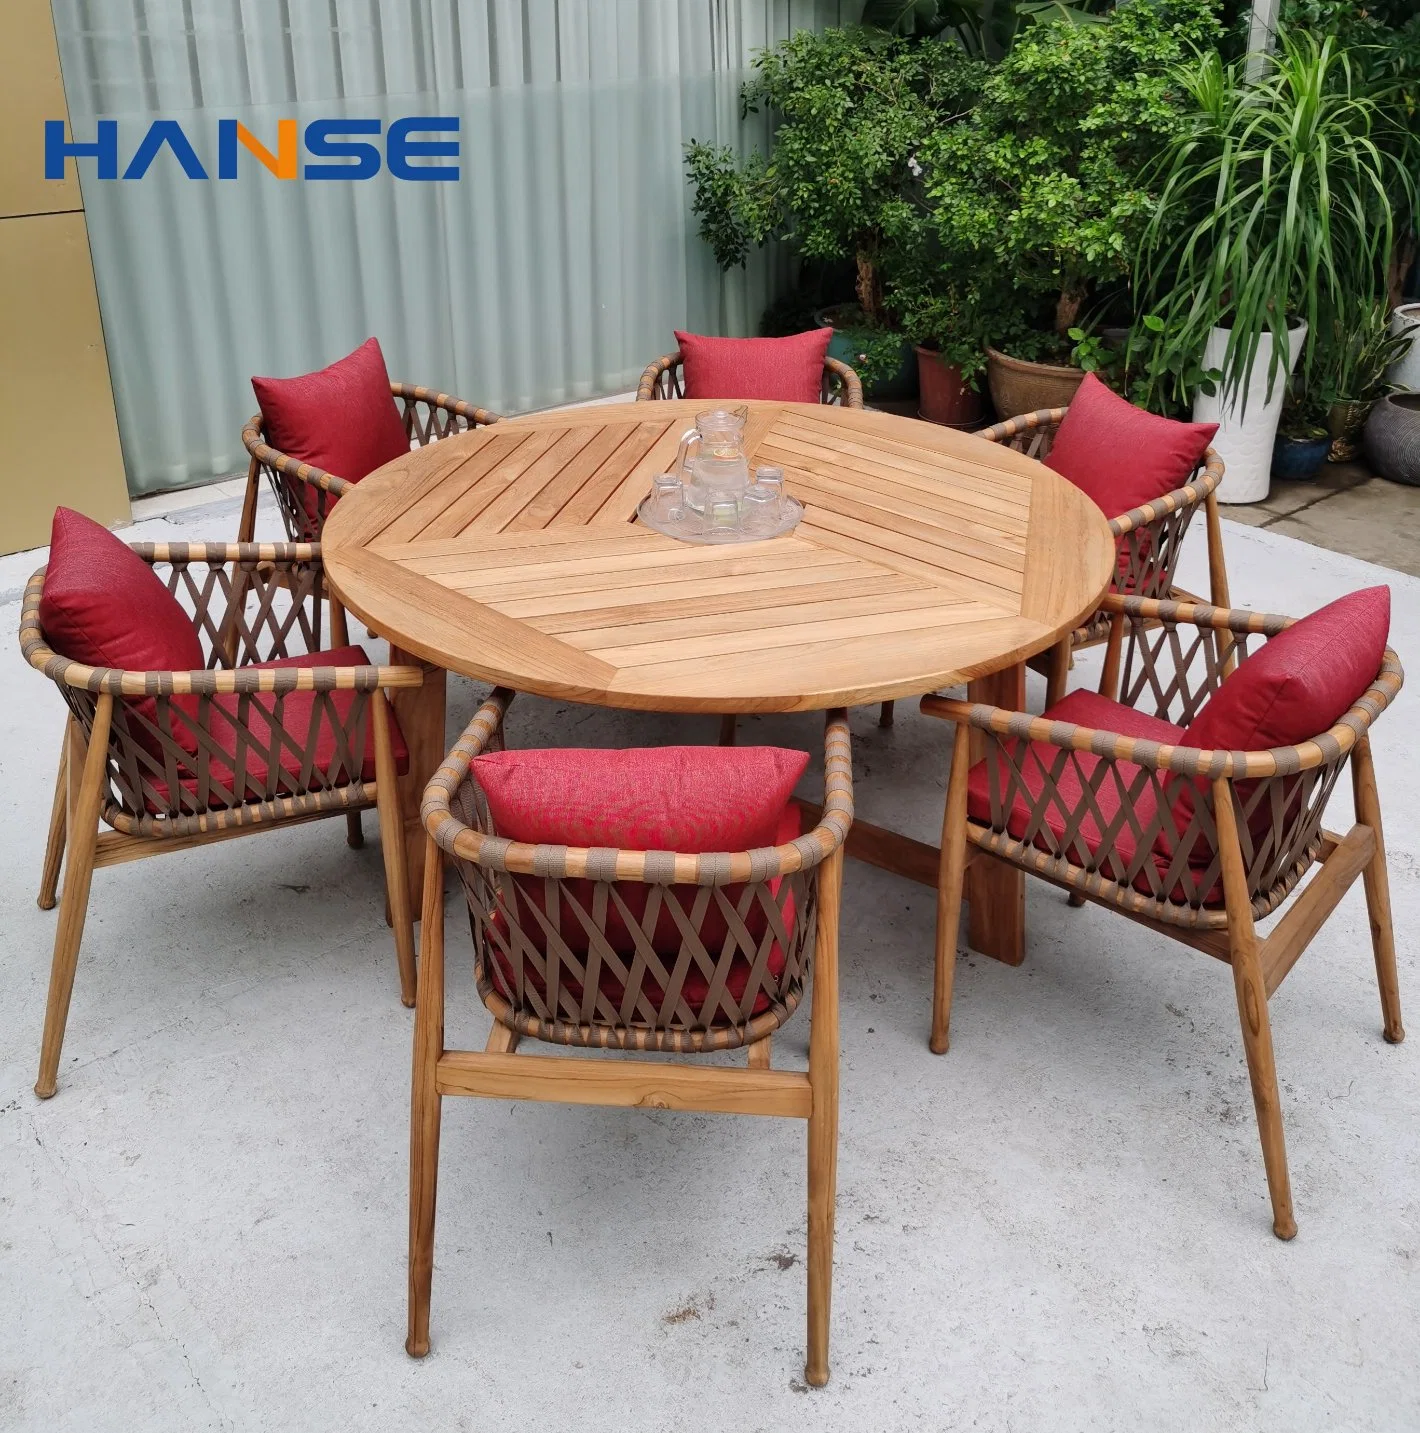 2023-Modern-Wood-Dining-Table-Sets Dining Room Sets 6 Chairs Table Furniture Luxury